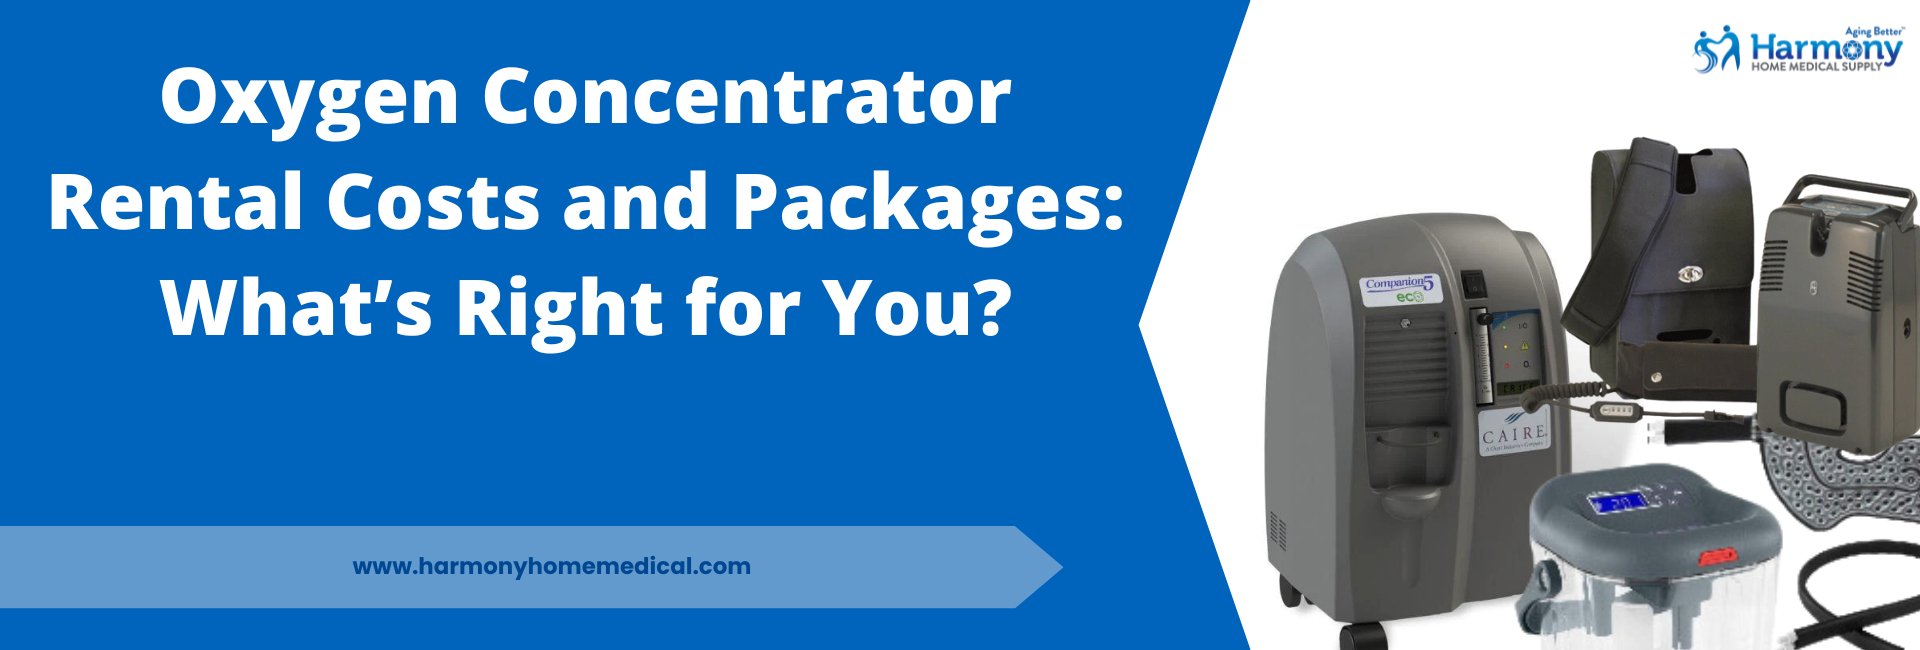 Oxygen Concentrator Rentals: Finding Your Ideal Package